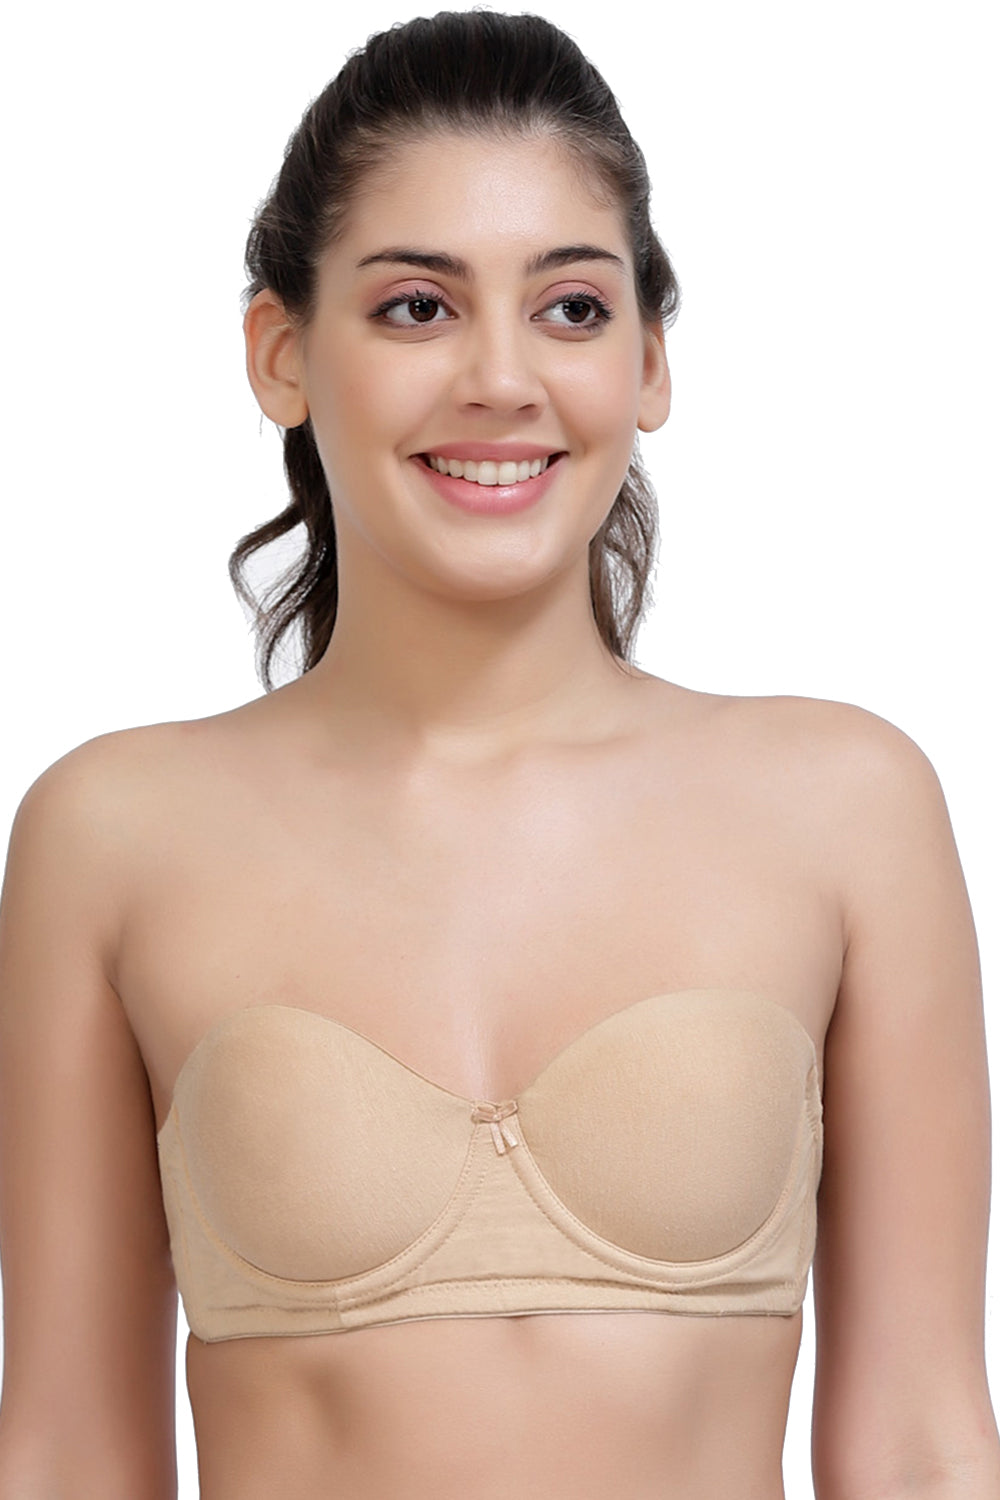 Strapless Bras 42C, Bras for Large Breasts